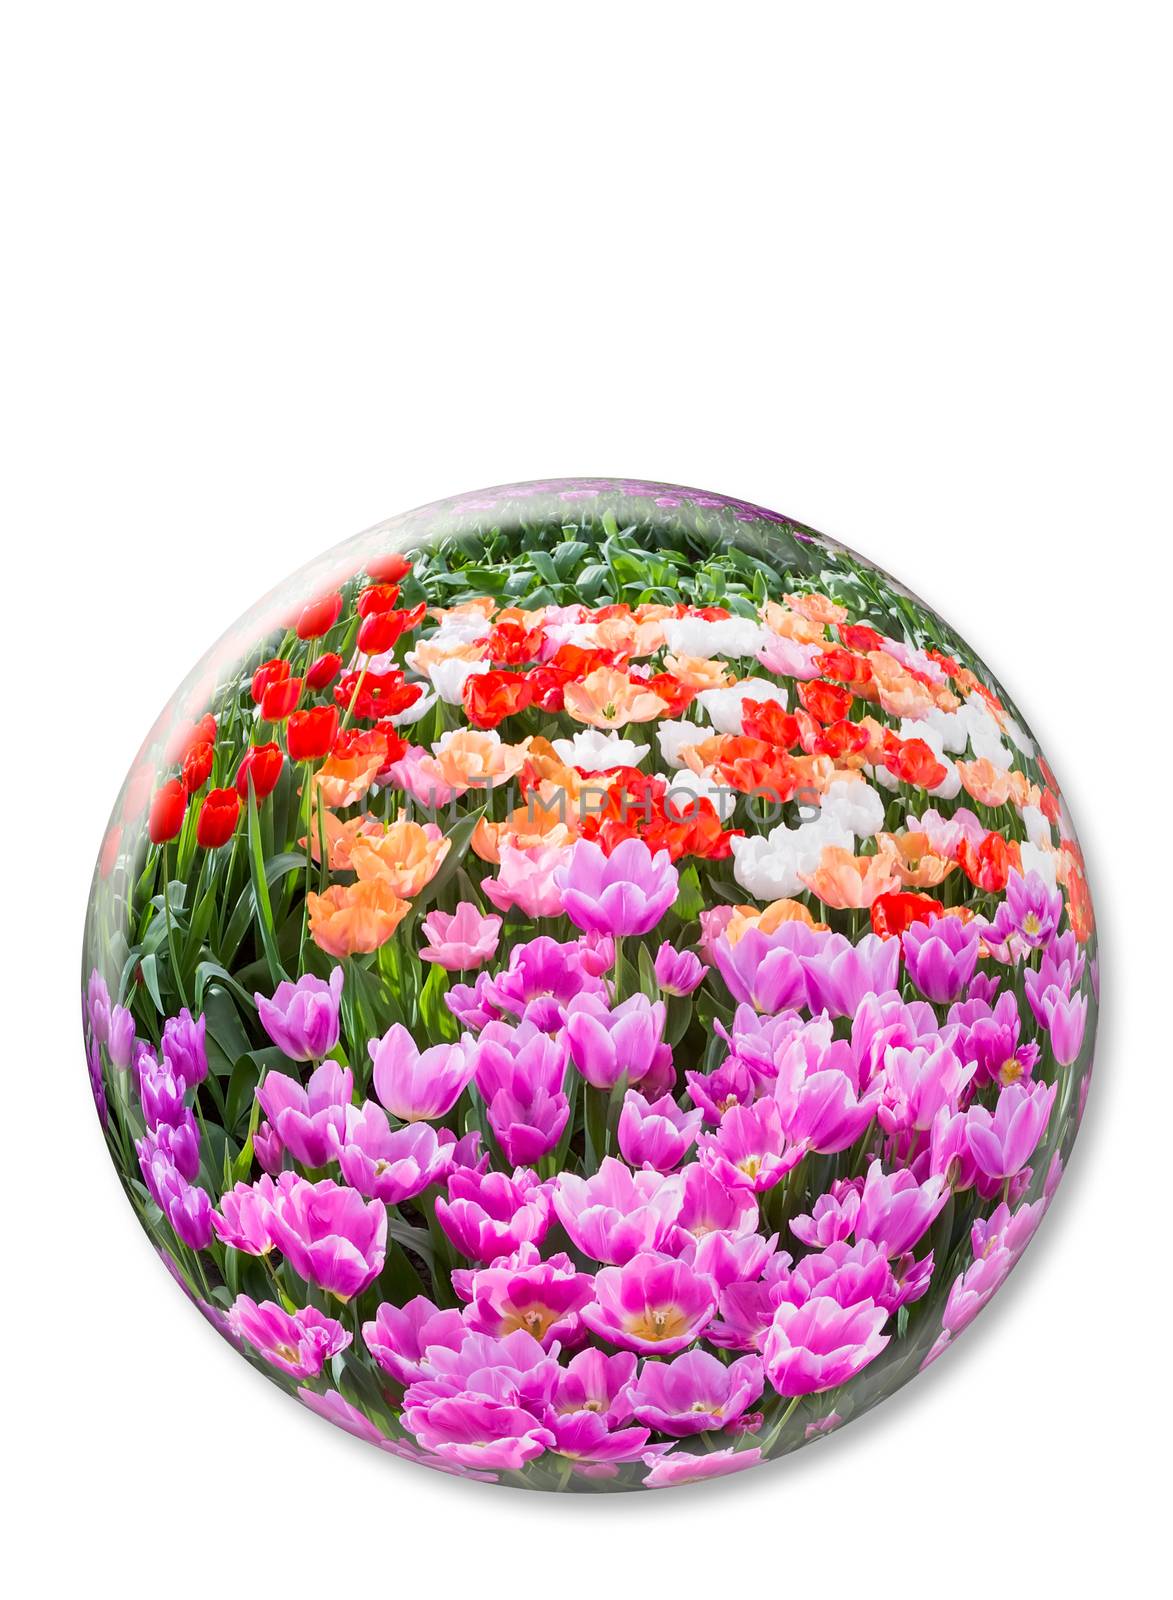 Glass sphere with various colored tulips in Keukenhof Holland isolated on white background